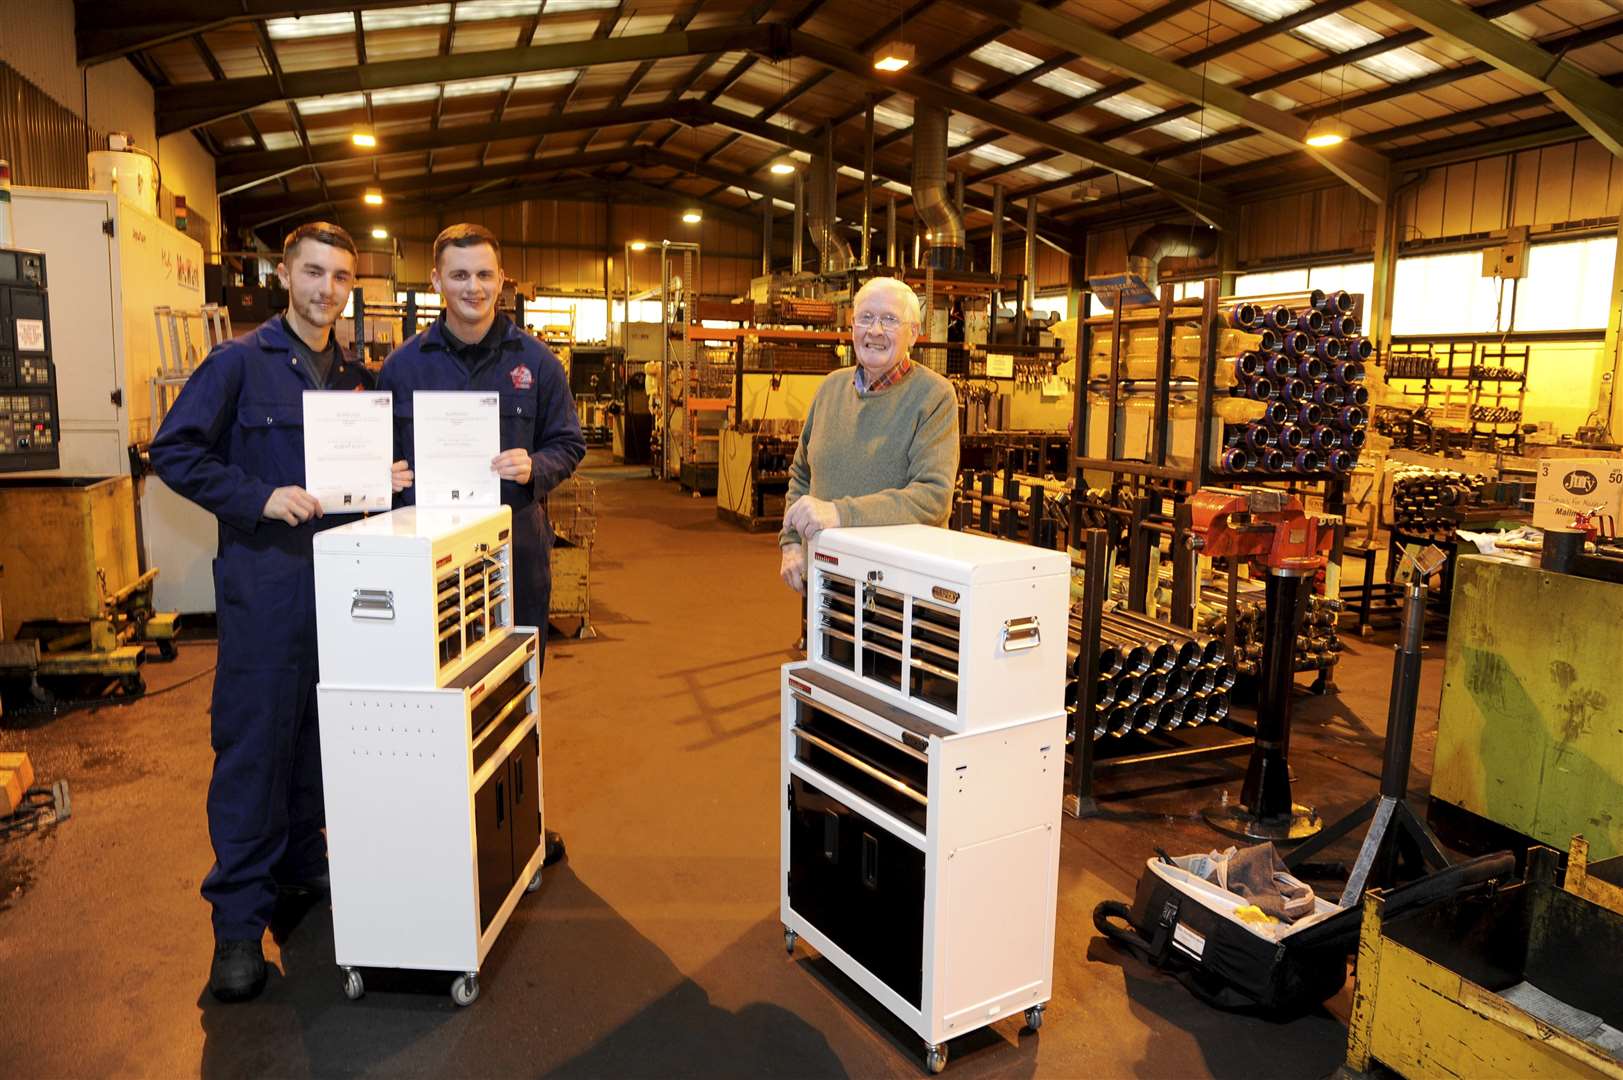 Robert Scott (left) and Scott Coull completed their apprenticeships with Hendry Hydraulics in Elgin. Mr Mike Hendry Snr (far right) handed over their certificates from Inverness College.